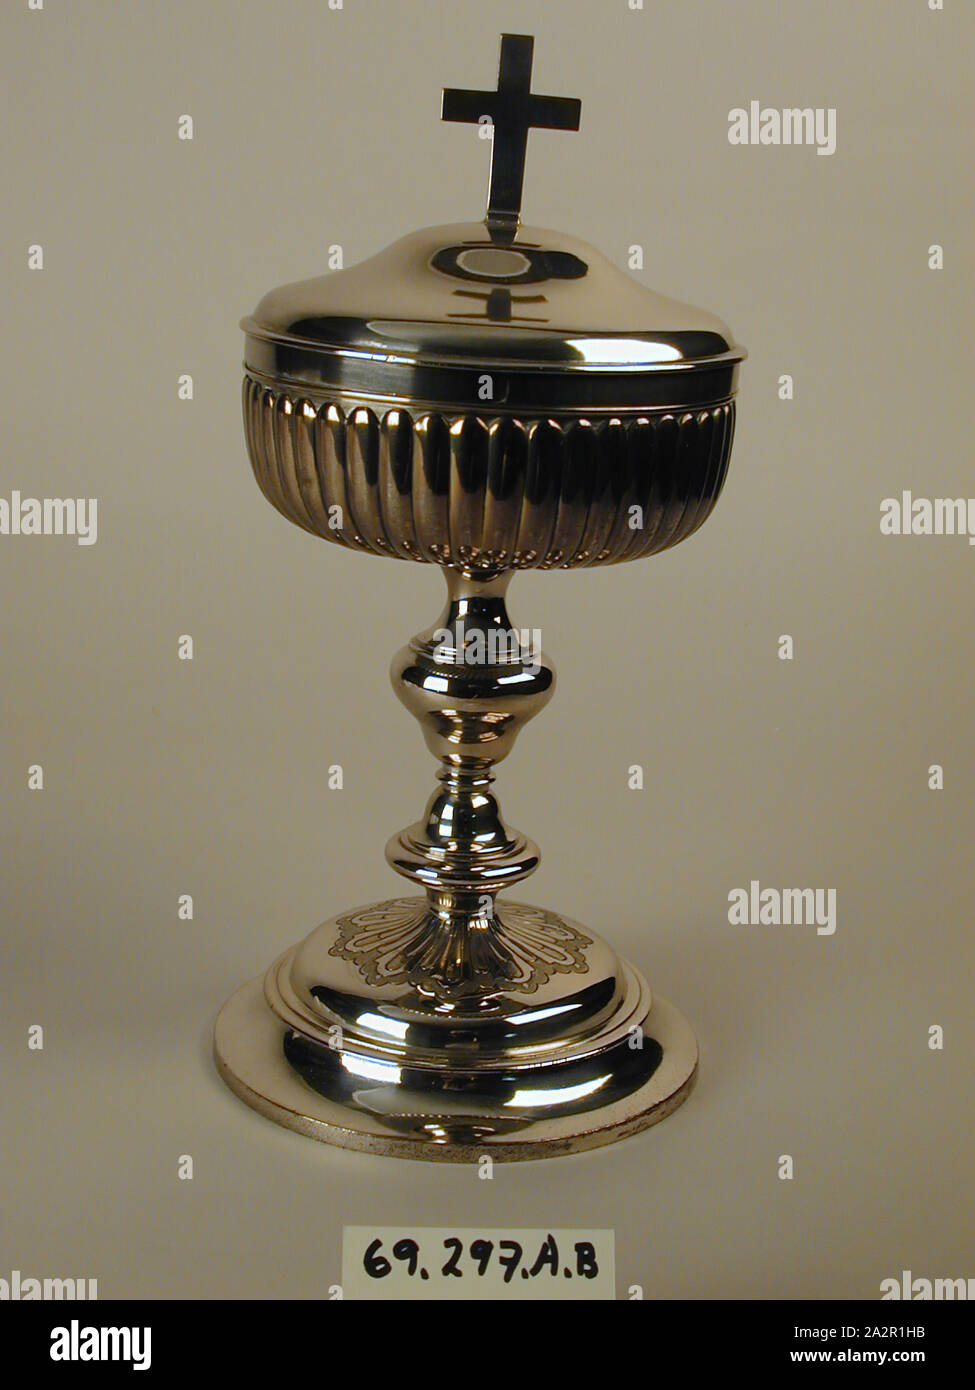 Laurent Amiot, Canadian, 1764-1839, Ciborium, between 1800 and 1810, silver, Overall: 10 × 5 inches (25.4 × 12.7 cm Stock Photo